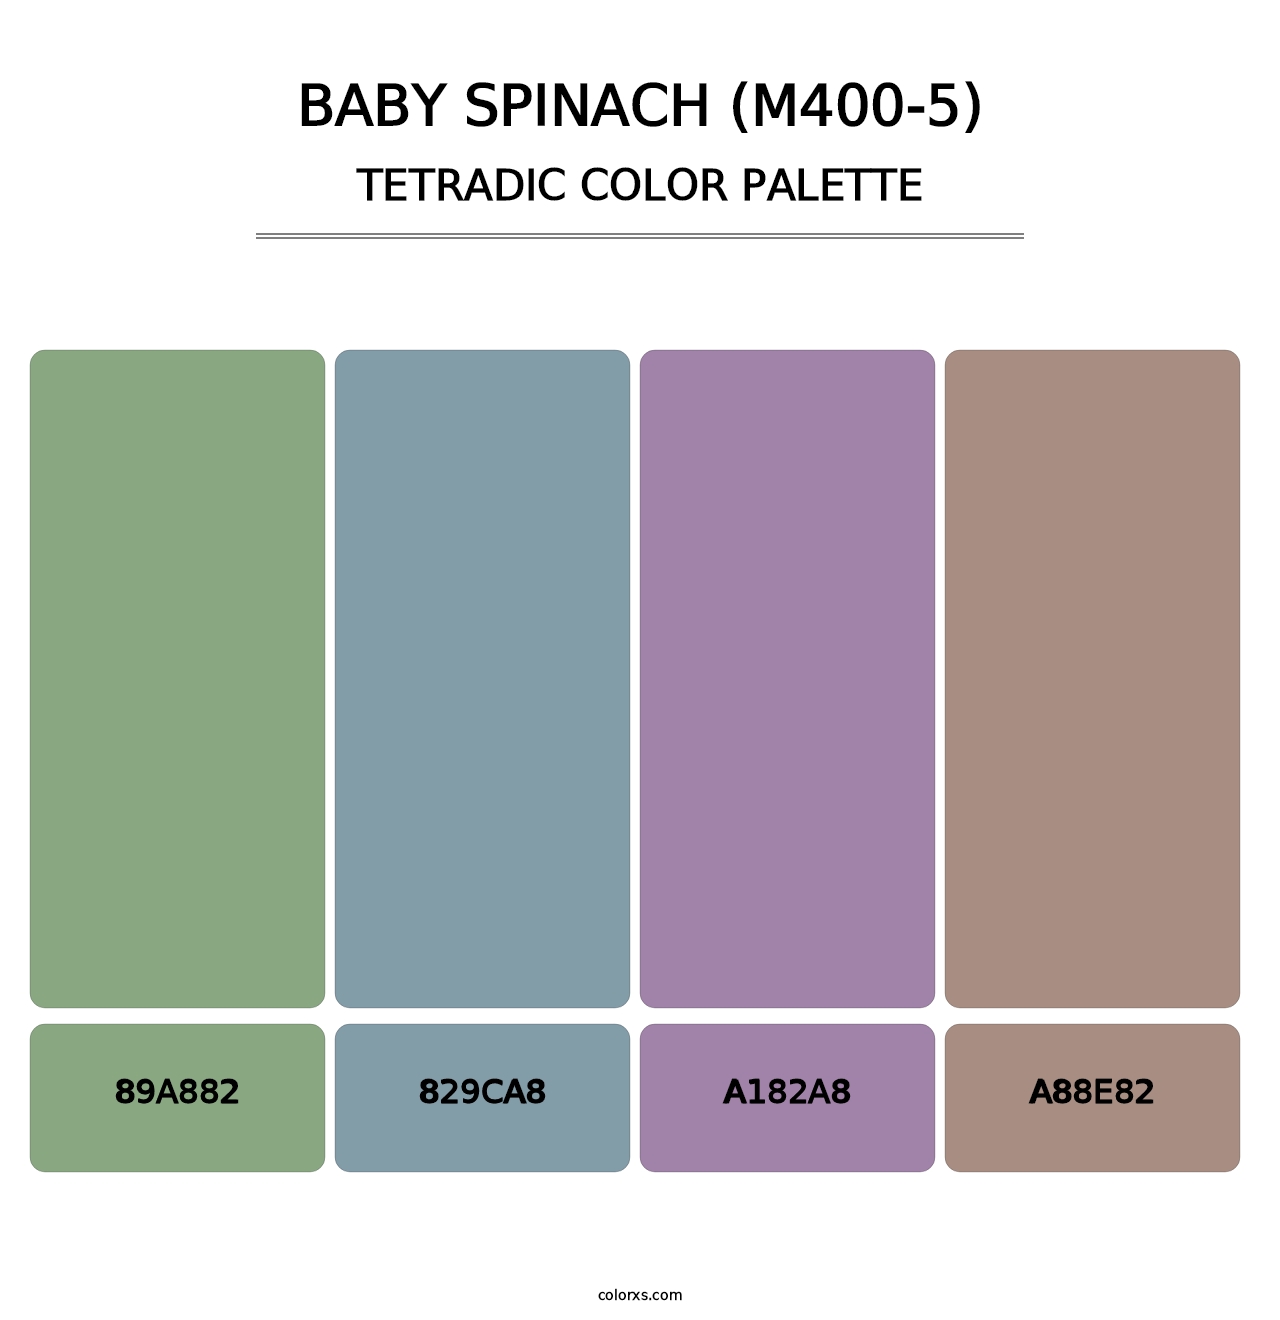 Baby Spinach (M400-5) - Tetradic Color Palette